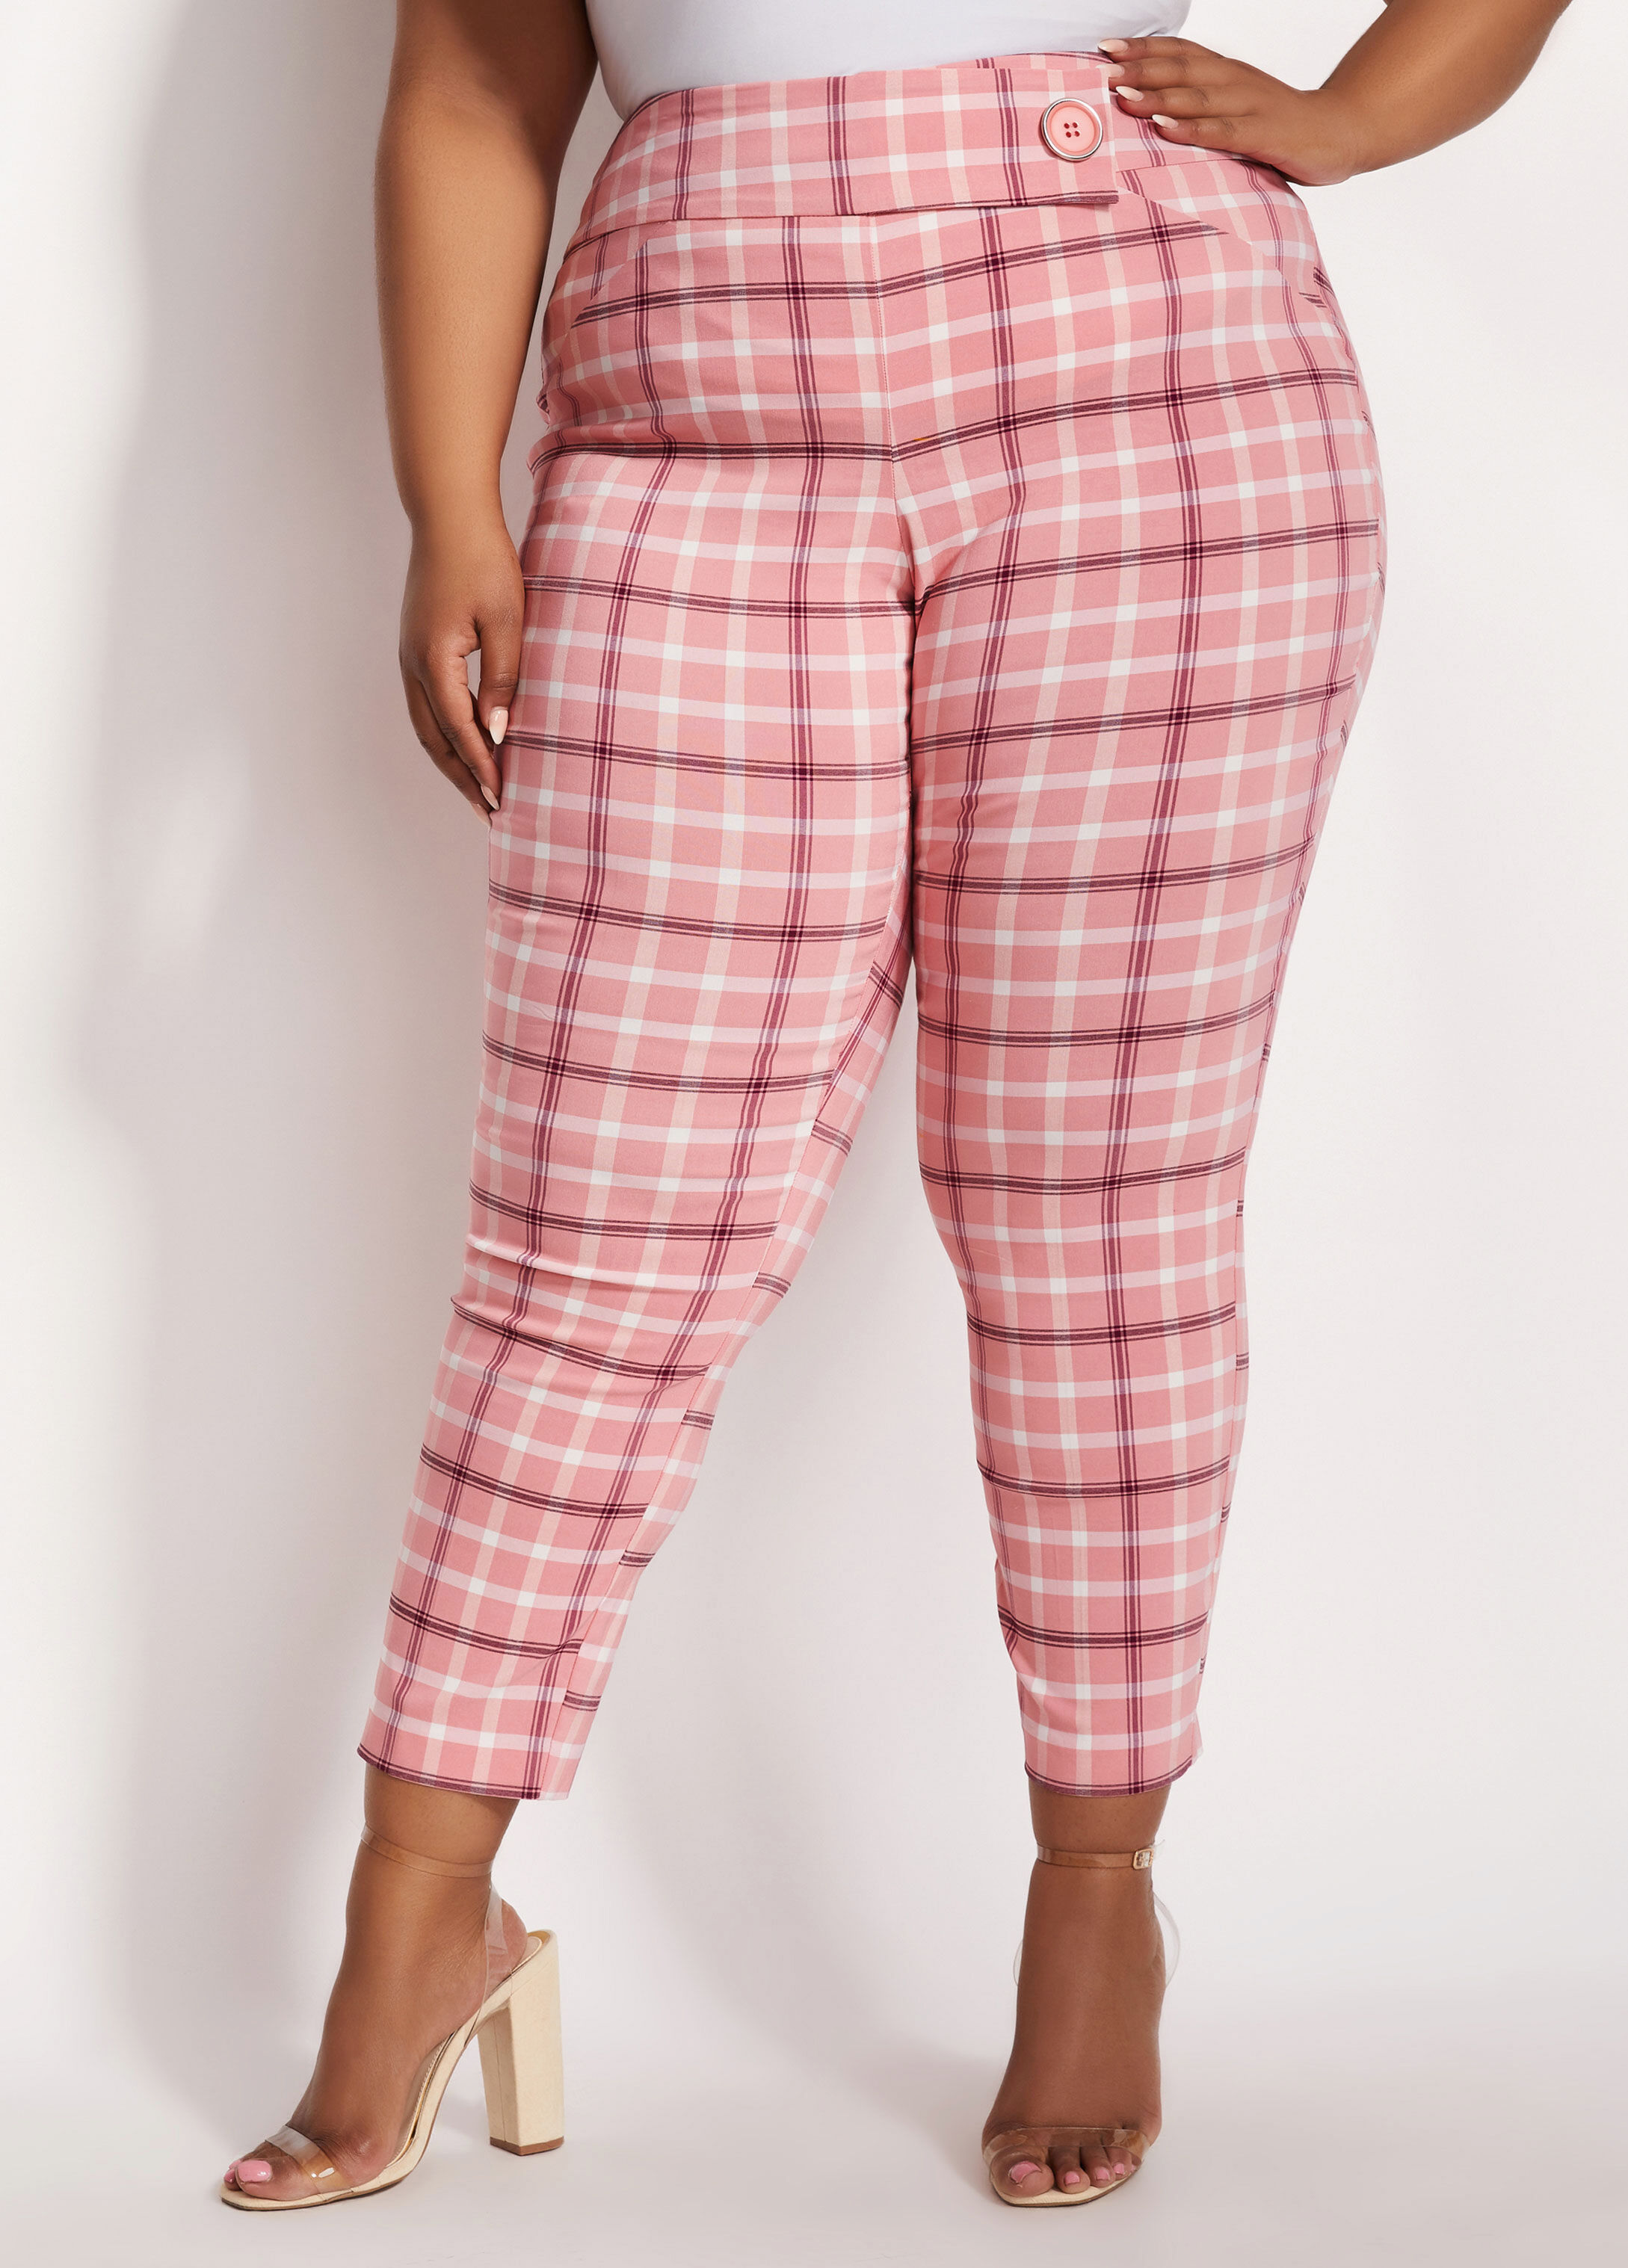 Buy Pink Plaid Pants Online In India  Etsy India